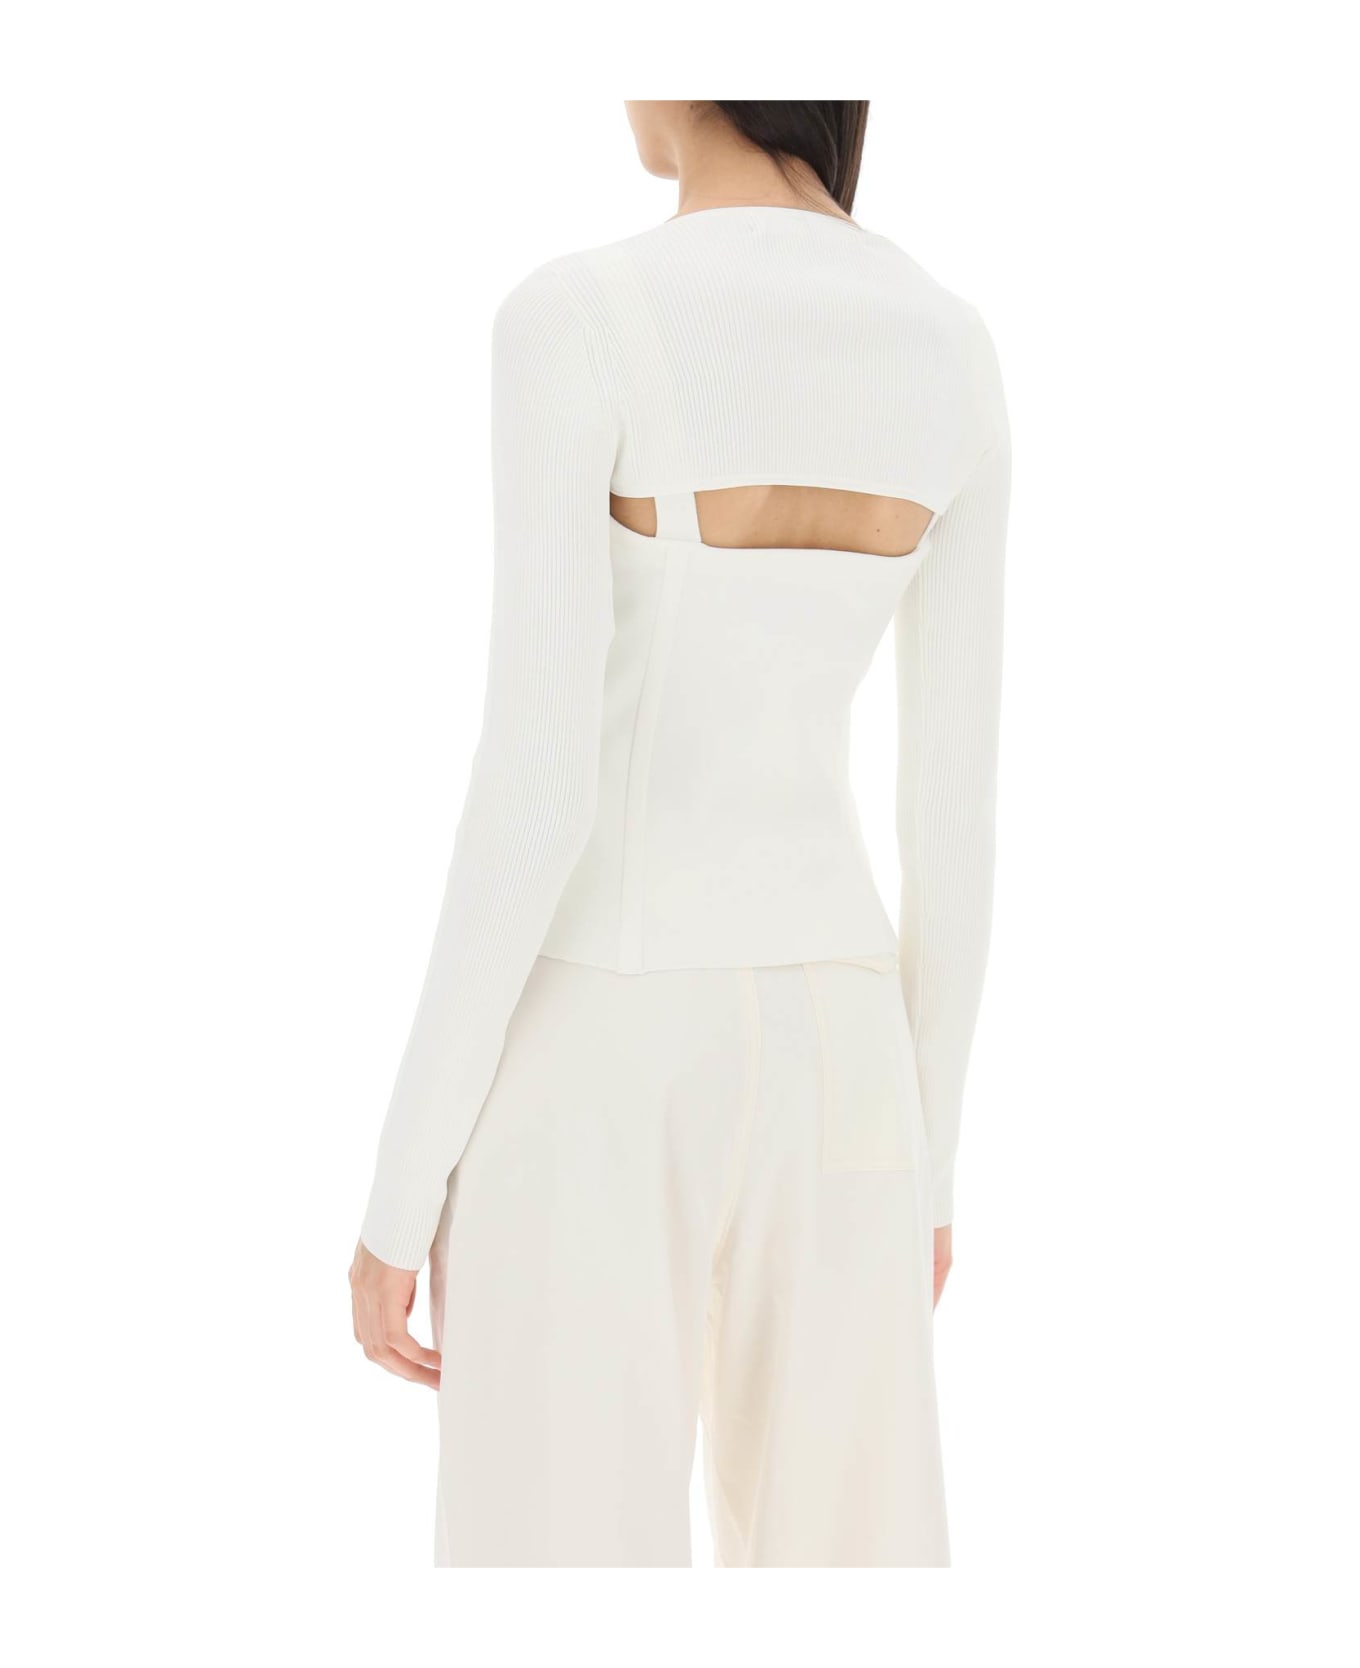 Dion Lee Modular Corset Top - IVORY (White)